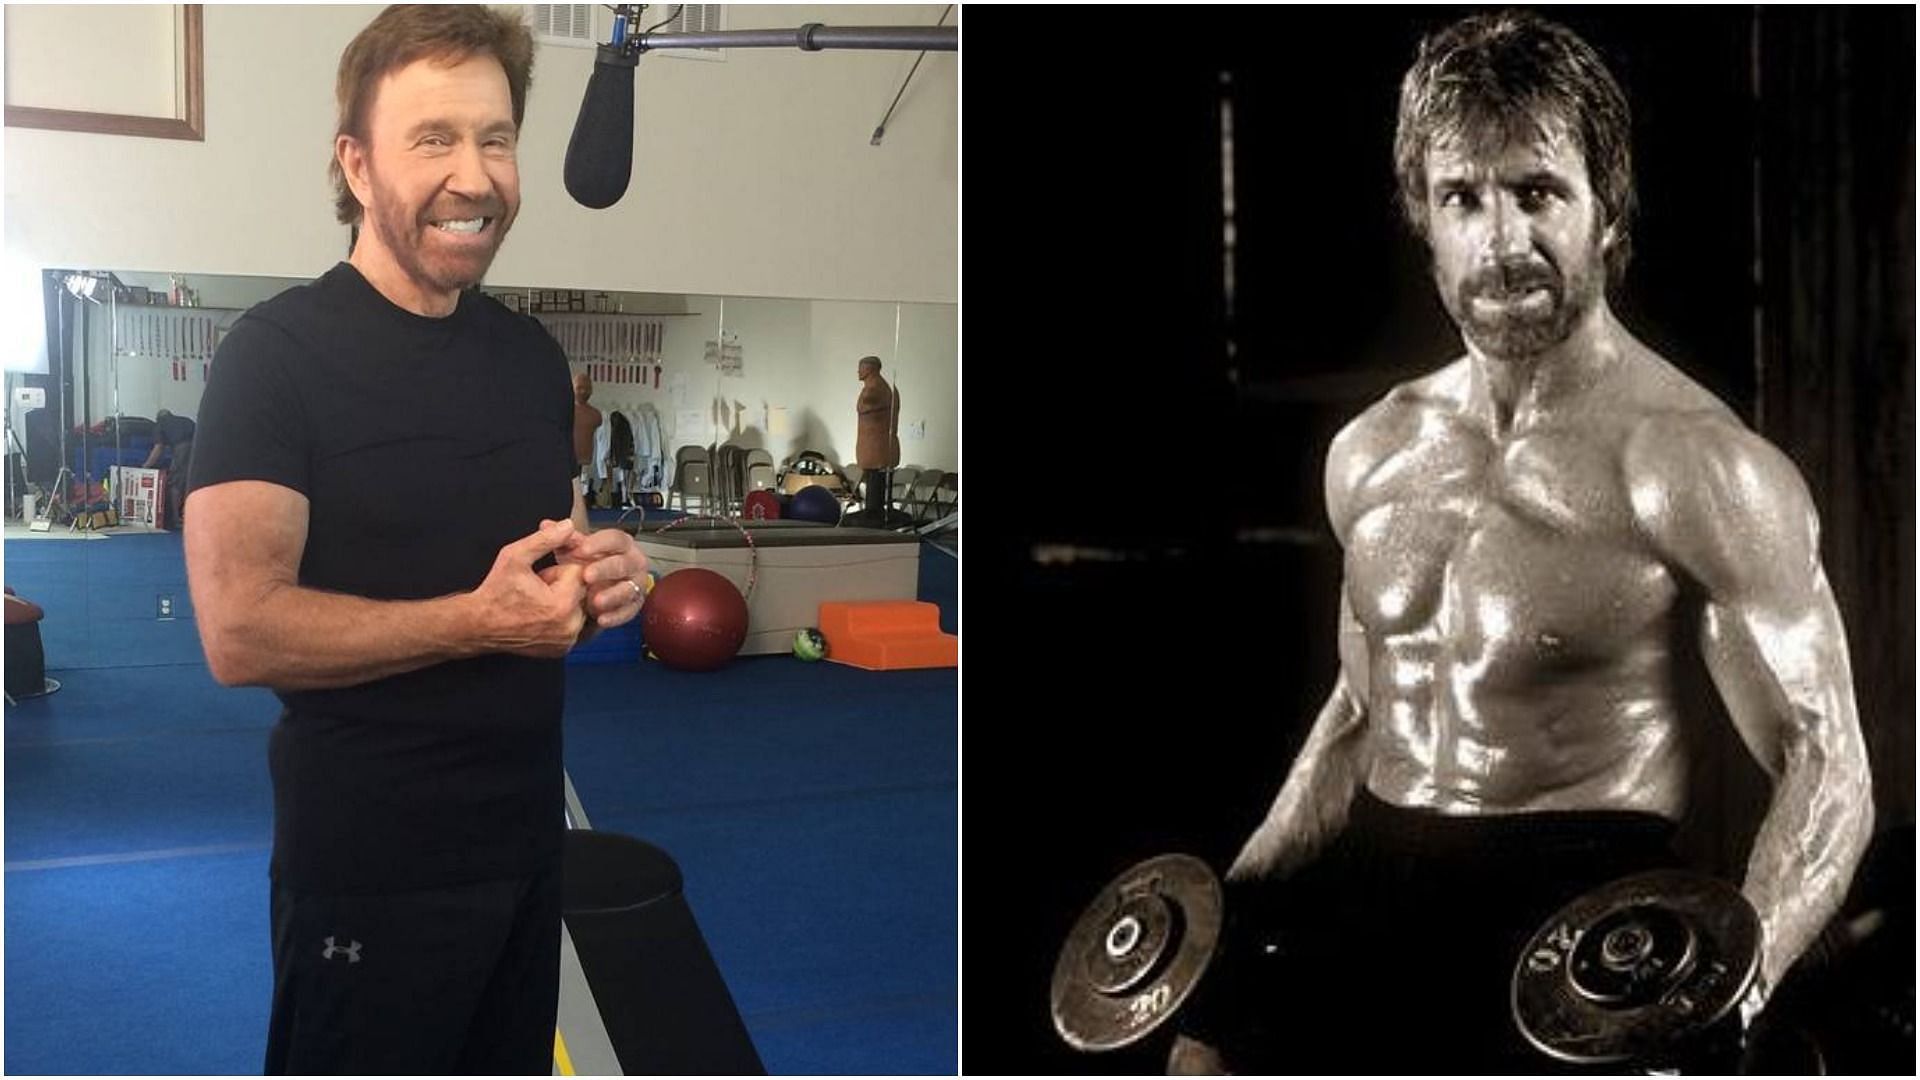 Chuck Norris works out four times a week at his Total Gym (Image via Instagram)